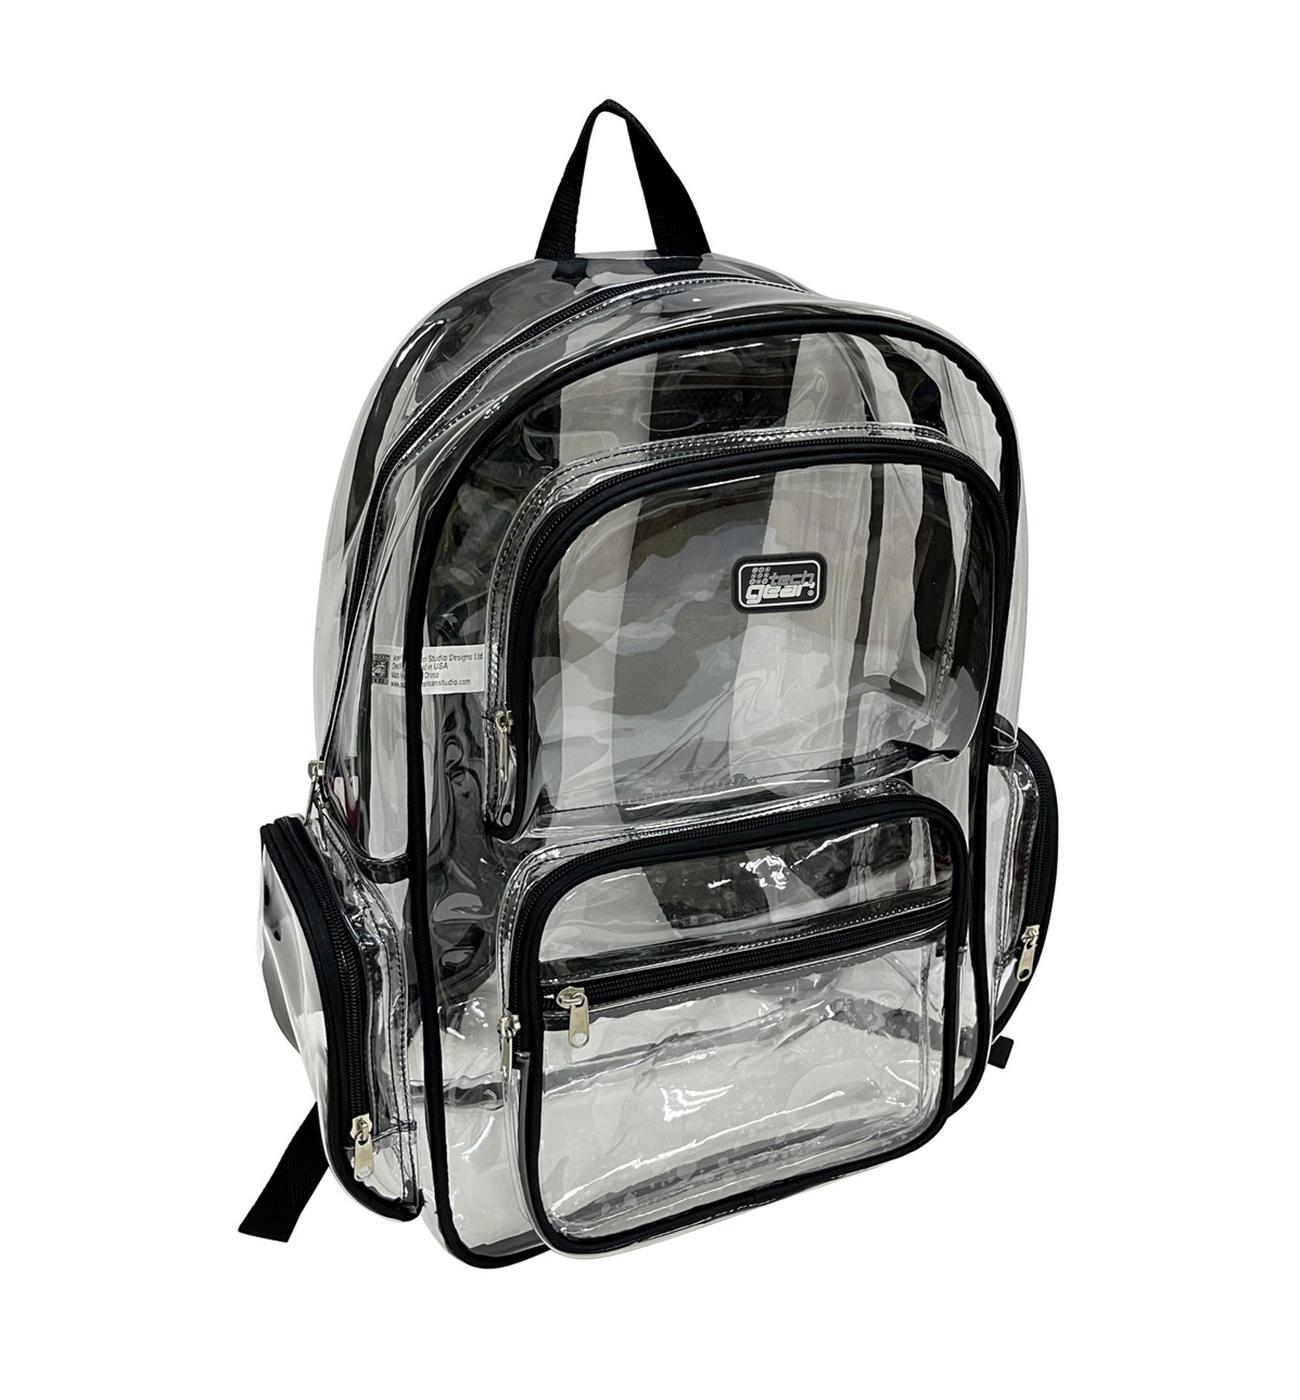 Tech Gear Clear Backpack with Trim - Black; image 2 of 3